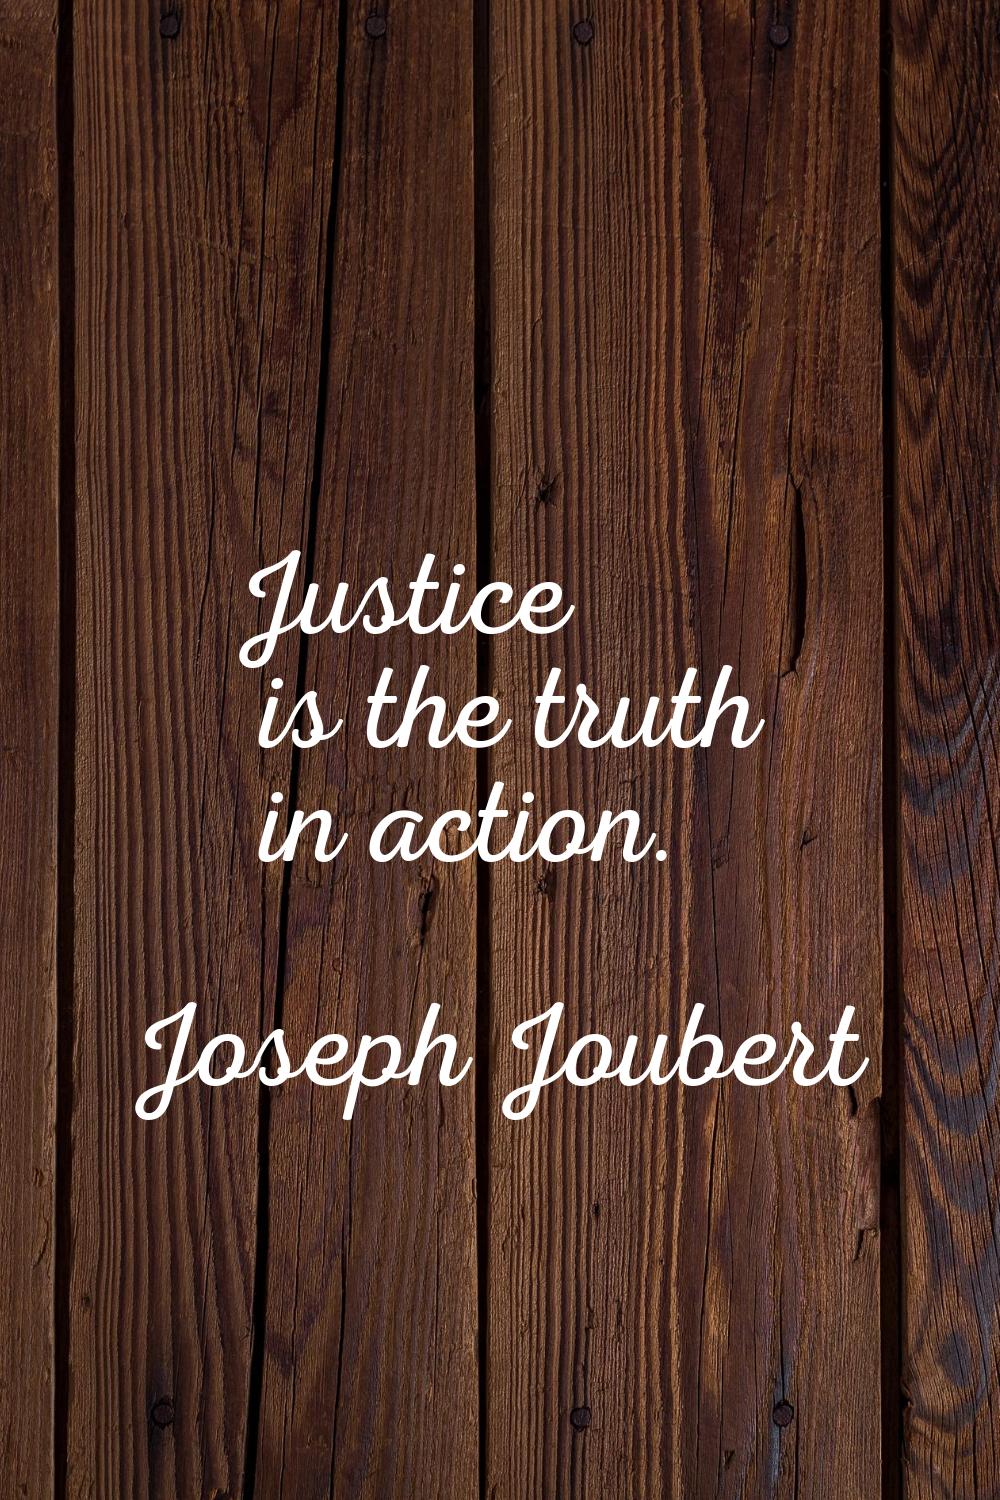 Justice is the truth in action.